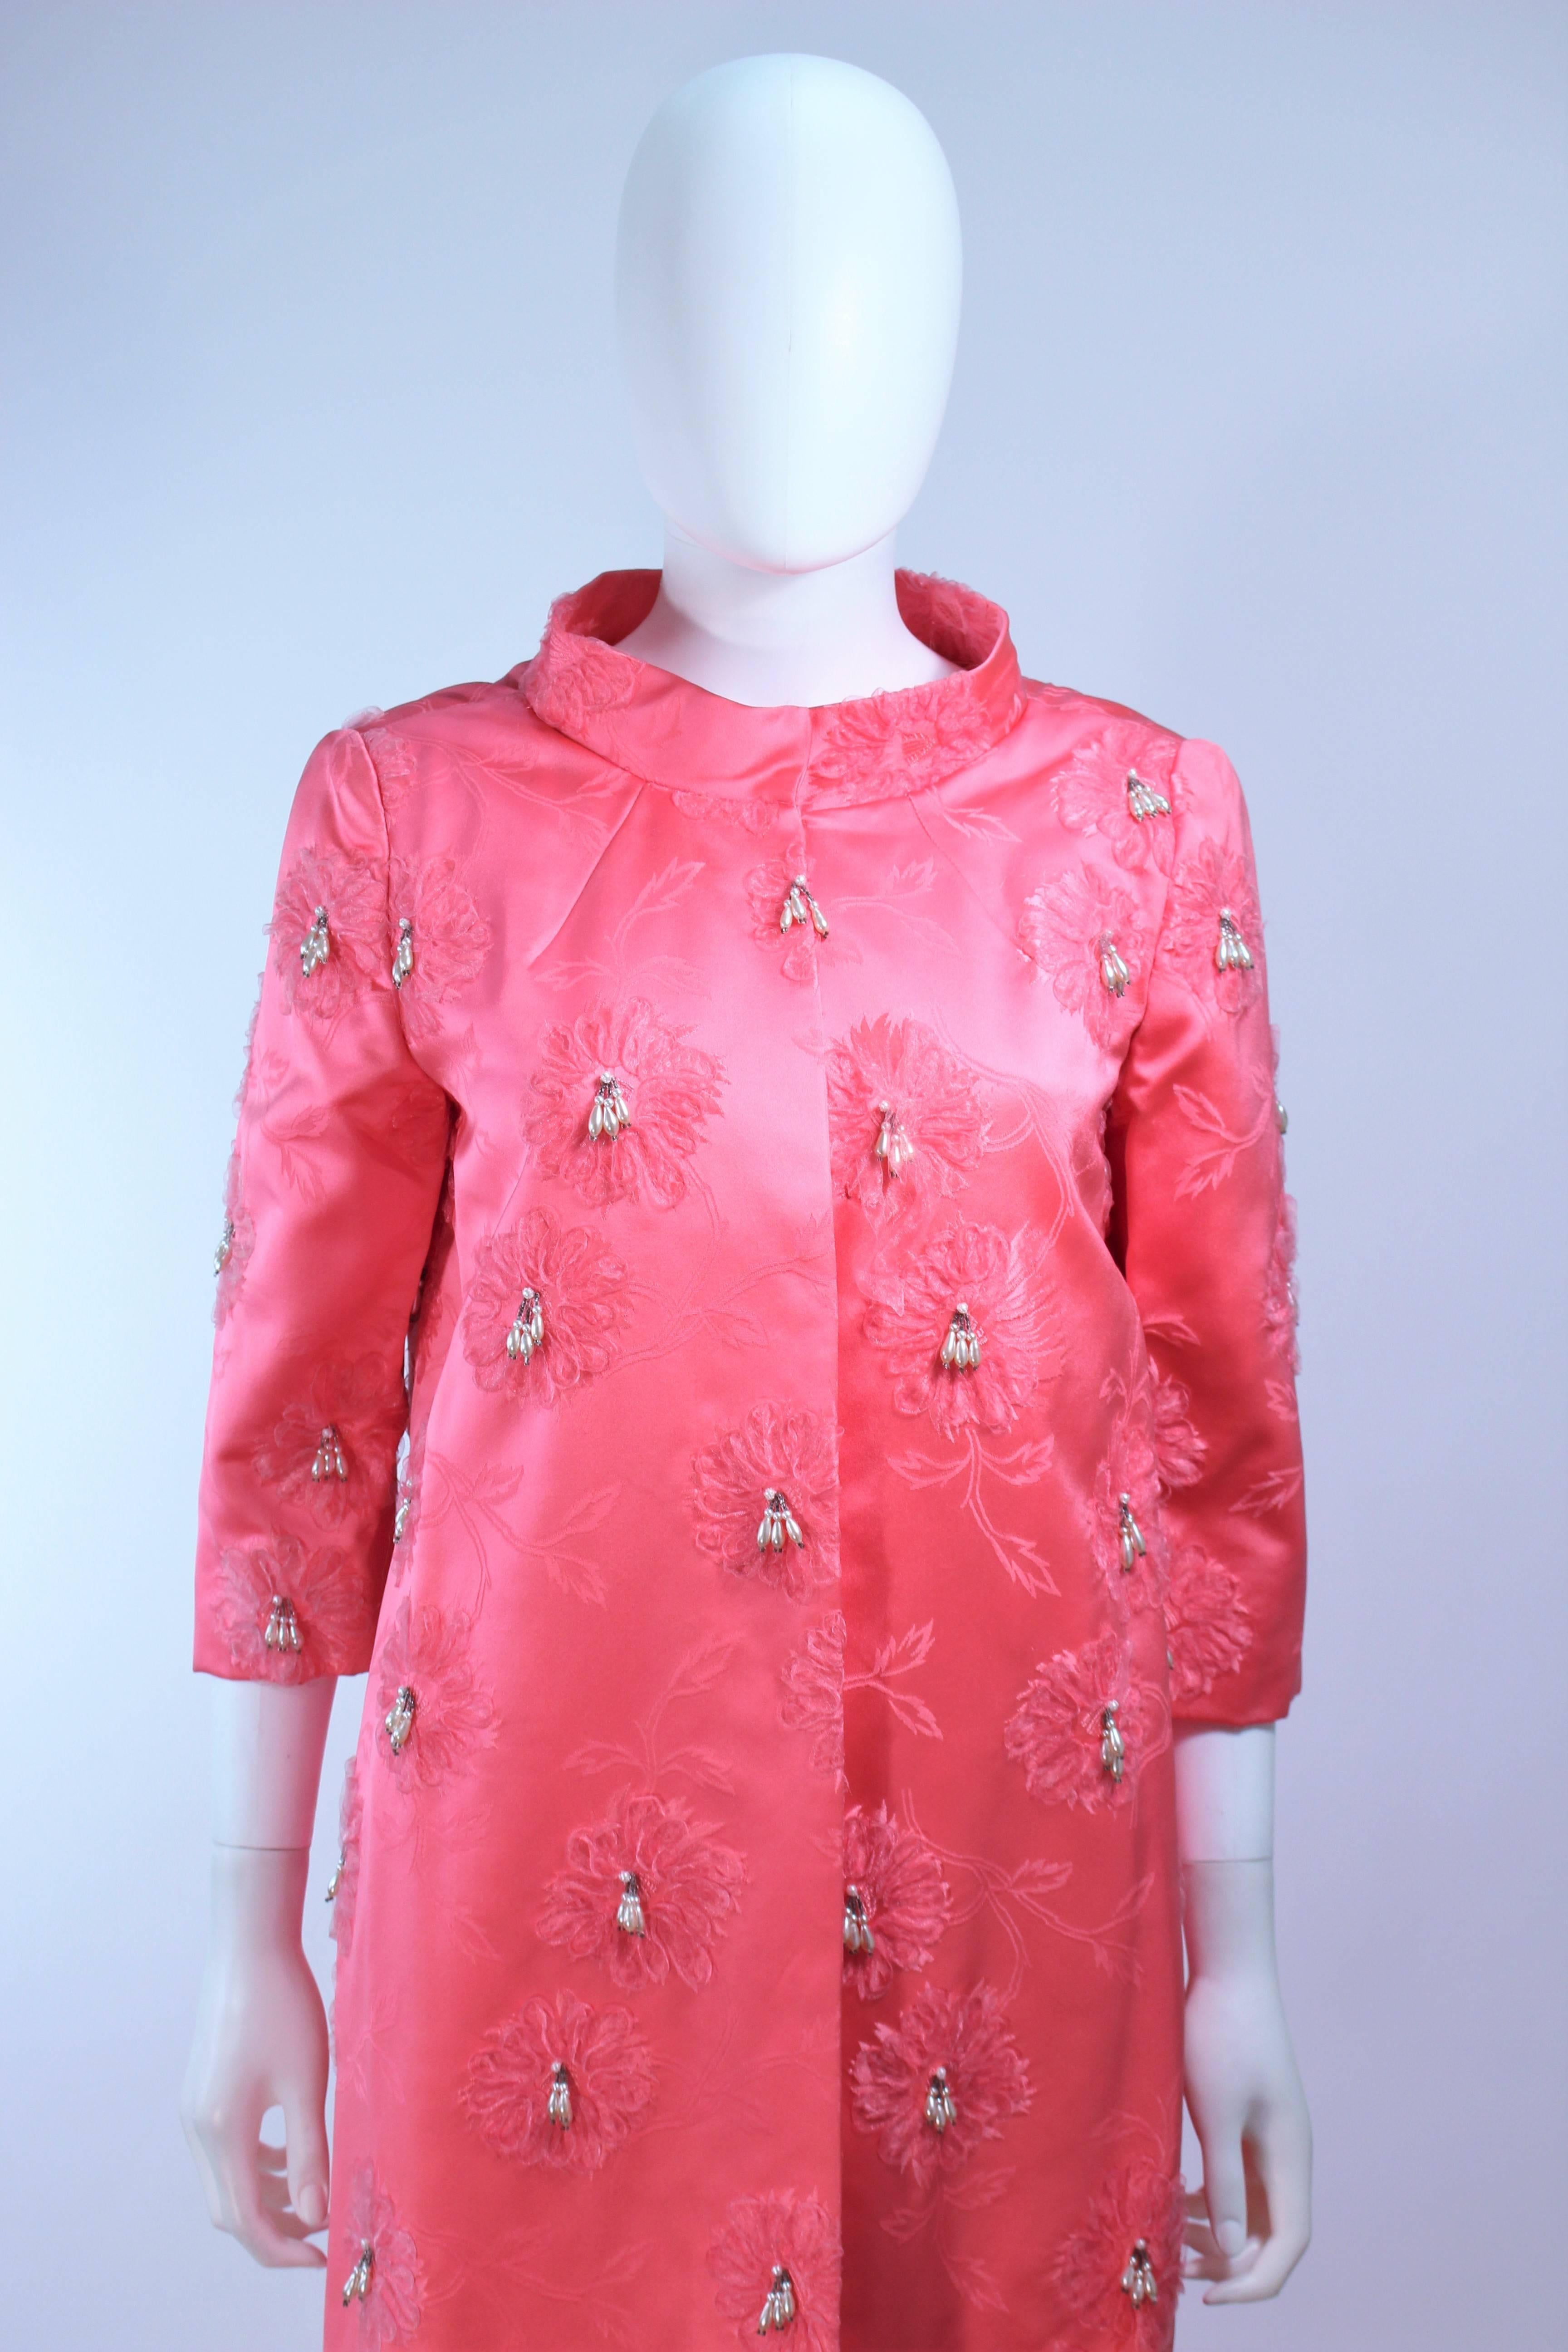 This coat is composed of a vibrant pink silk with faux pearl applique and bow design. Features center front hook and eye closures and belt. In excellent vintage condition.

**Please cross-reference measurements for personal accuracy. Size in